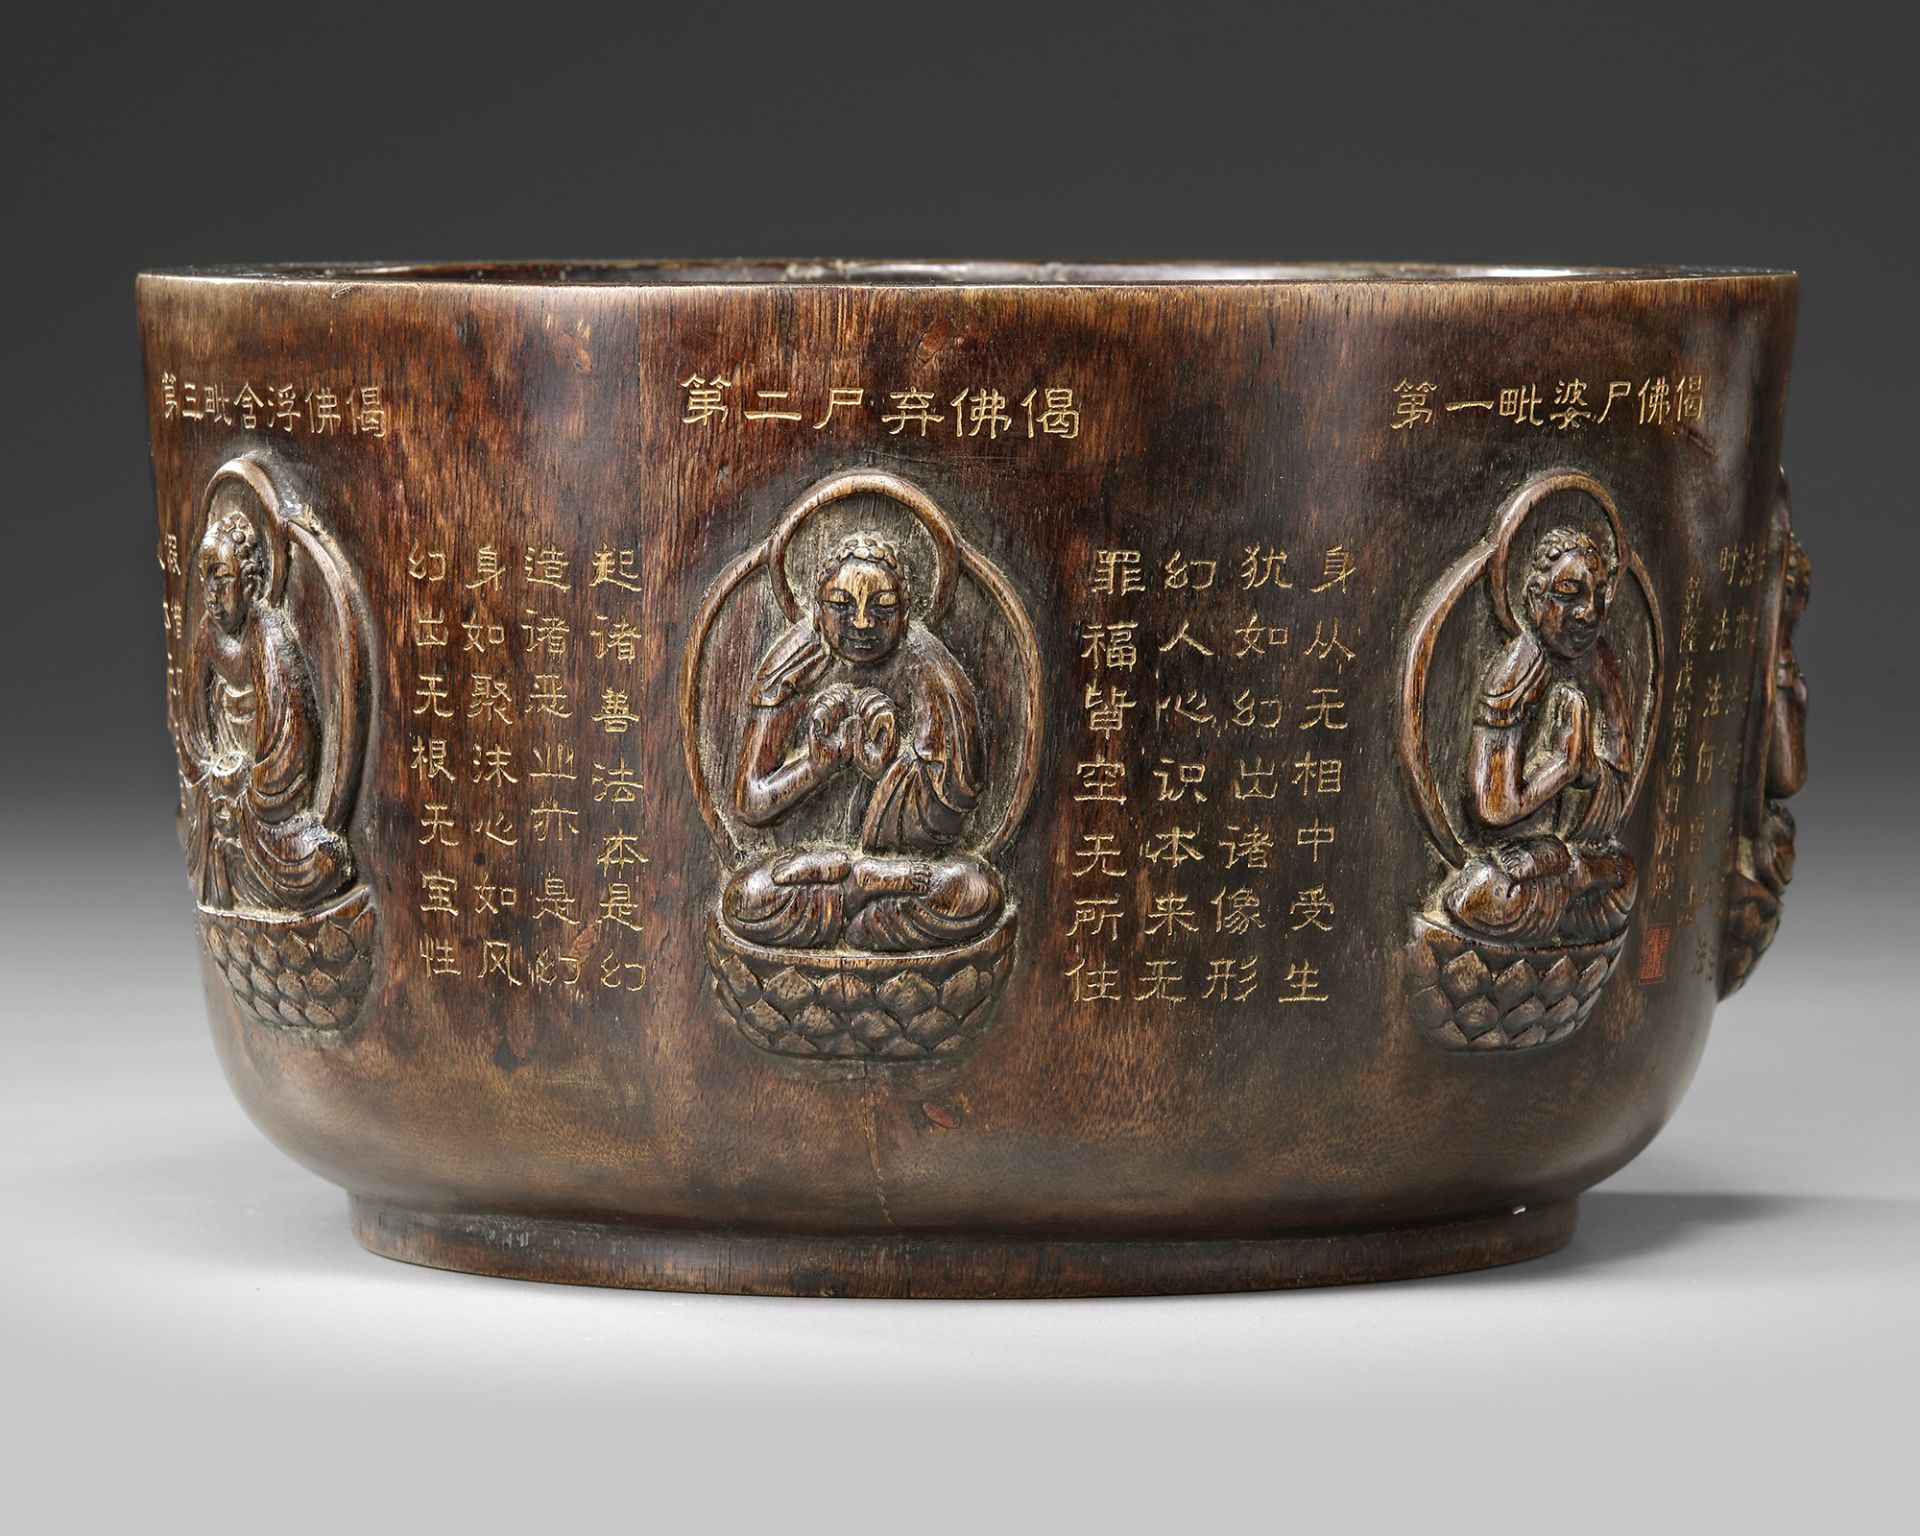 A CHINESE CARVED WOODEN BOWL, QING DYNASTY (1644-1912)